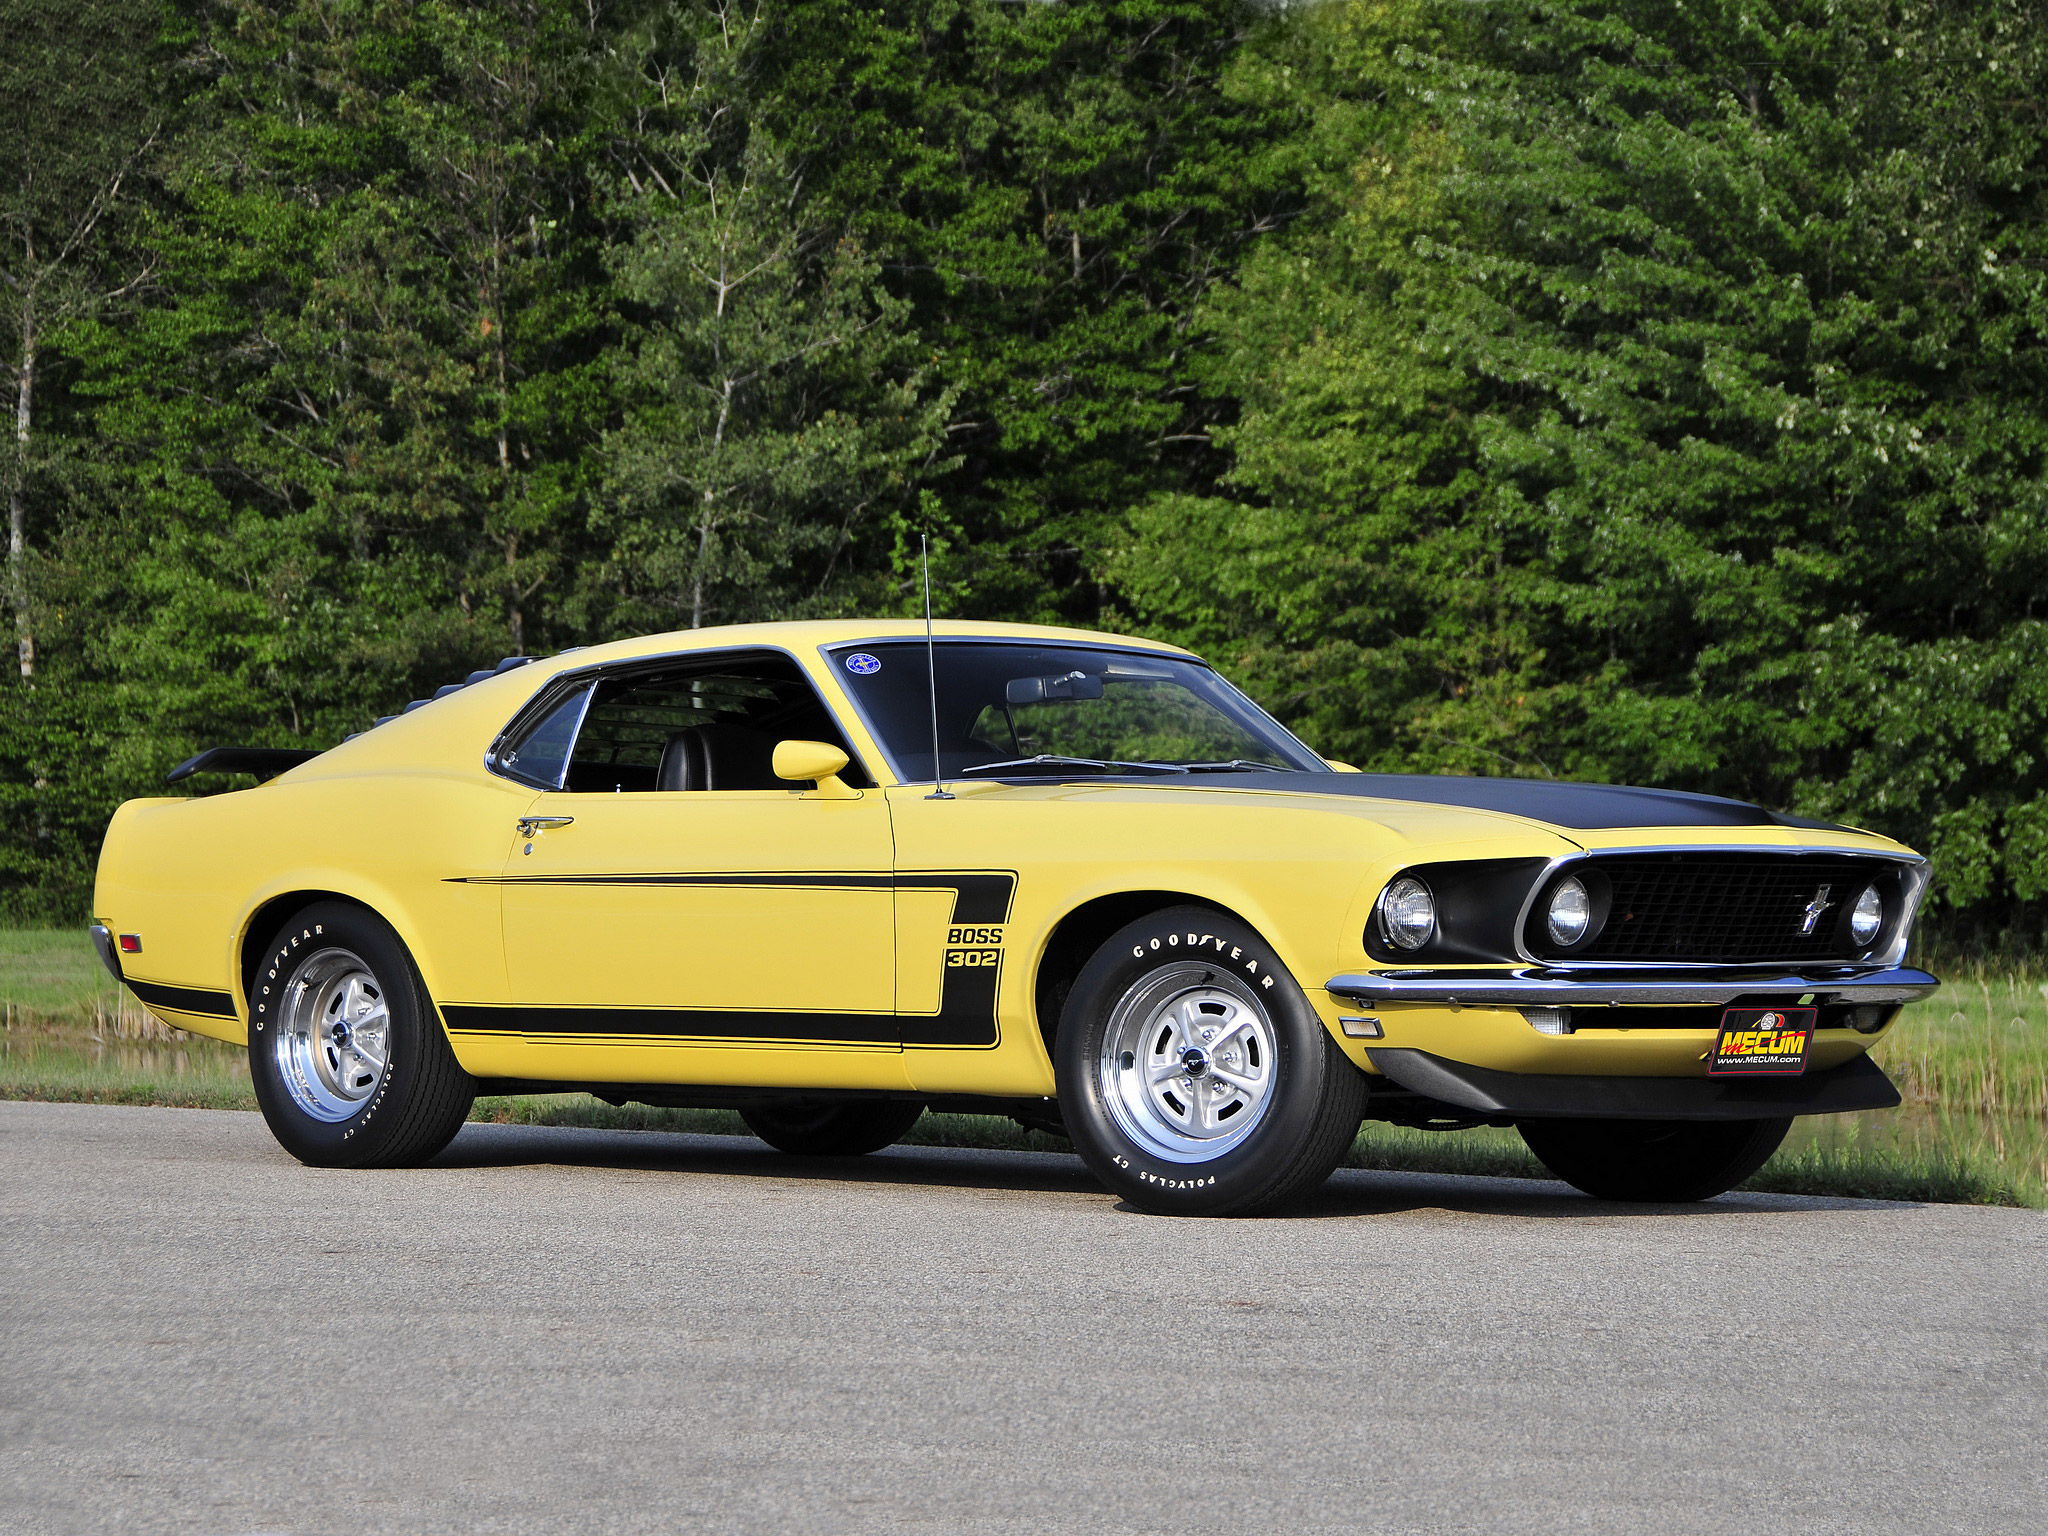 1969 Ford Mustang 302 Wallpapers | SuperCars.net